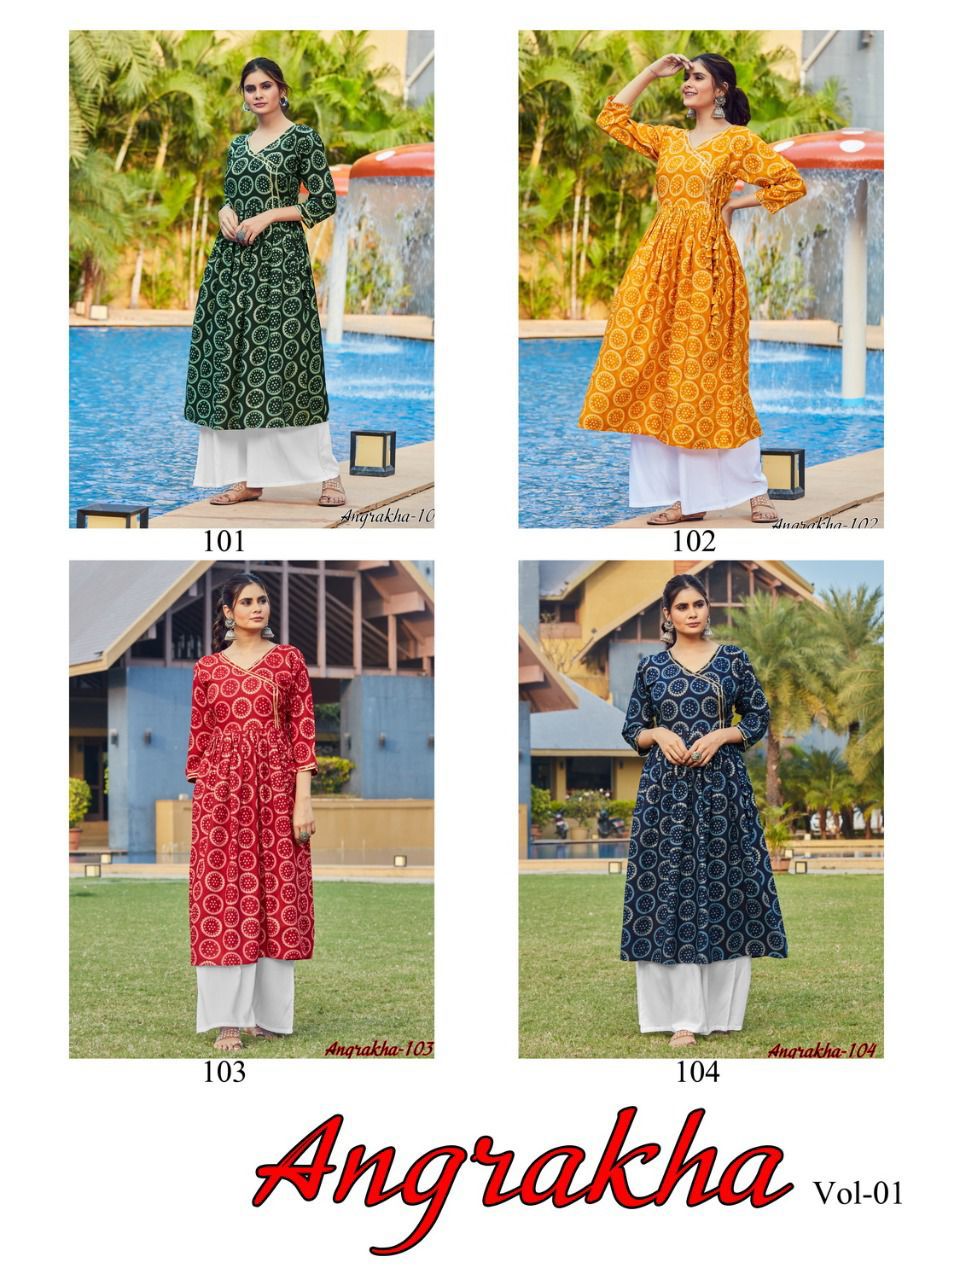 𝓜𝓸𝓭𝓪𝓵 𝓐𝓷𝓰𝓻𝓪𝓴𝓱𝓪 𝓢𝓽𝔂𝓵𝓮 𝓚𝓾𝓻𝓽𝓲 Elegant angrakha style  kurti Looks very beautiful, perfect for summers with that royal essence.  Swipe for… | Instagram